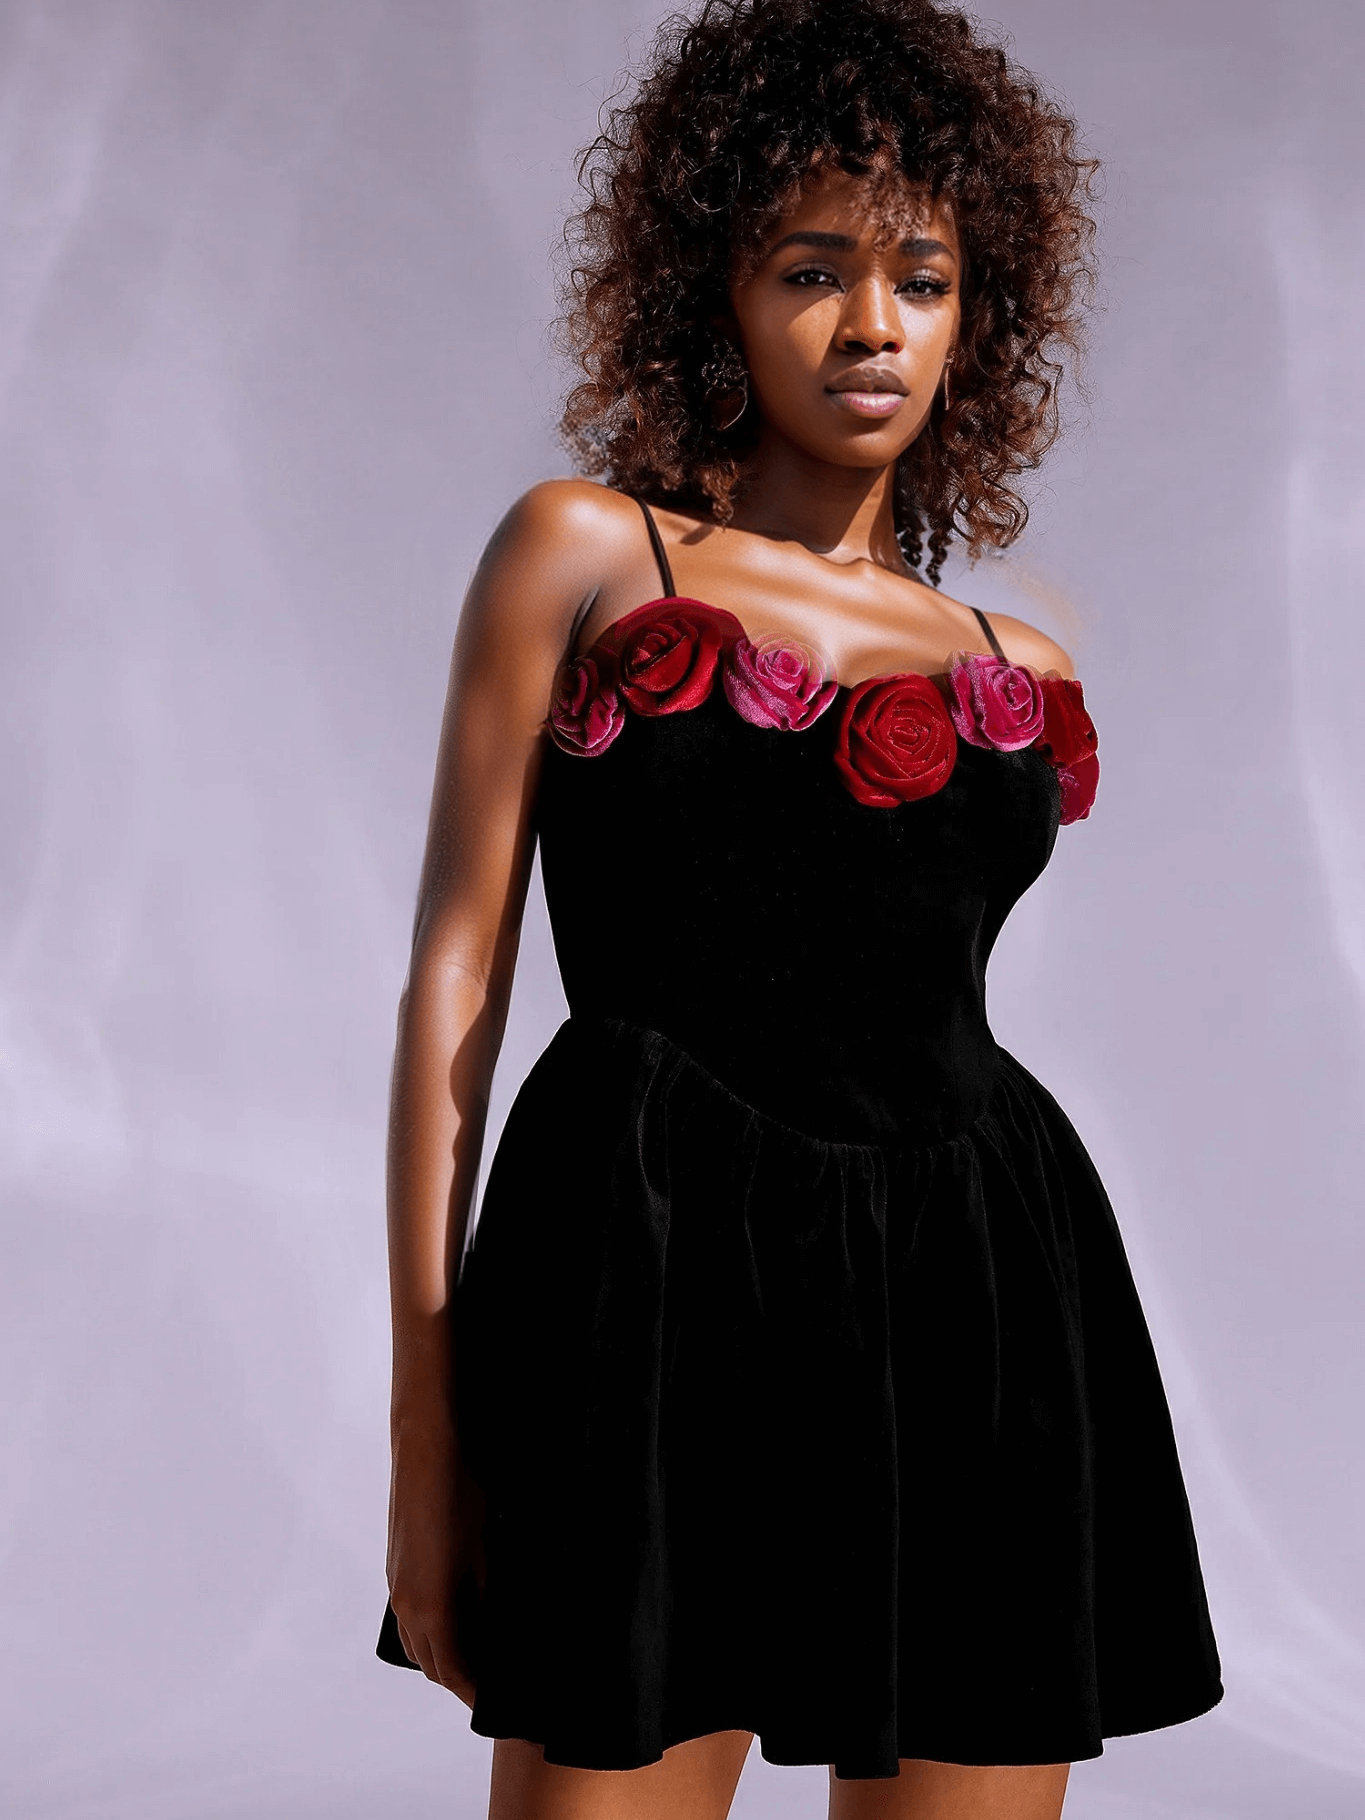 Black halter dress with cutout flower details adorned with sequins